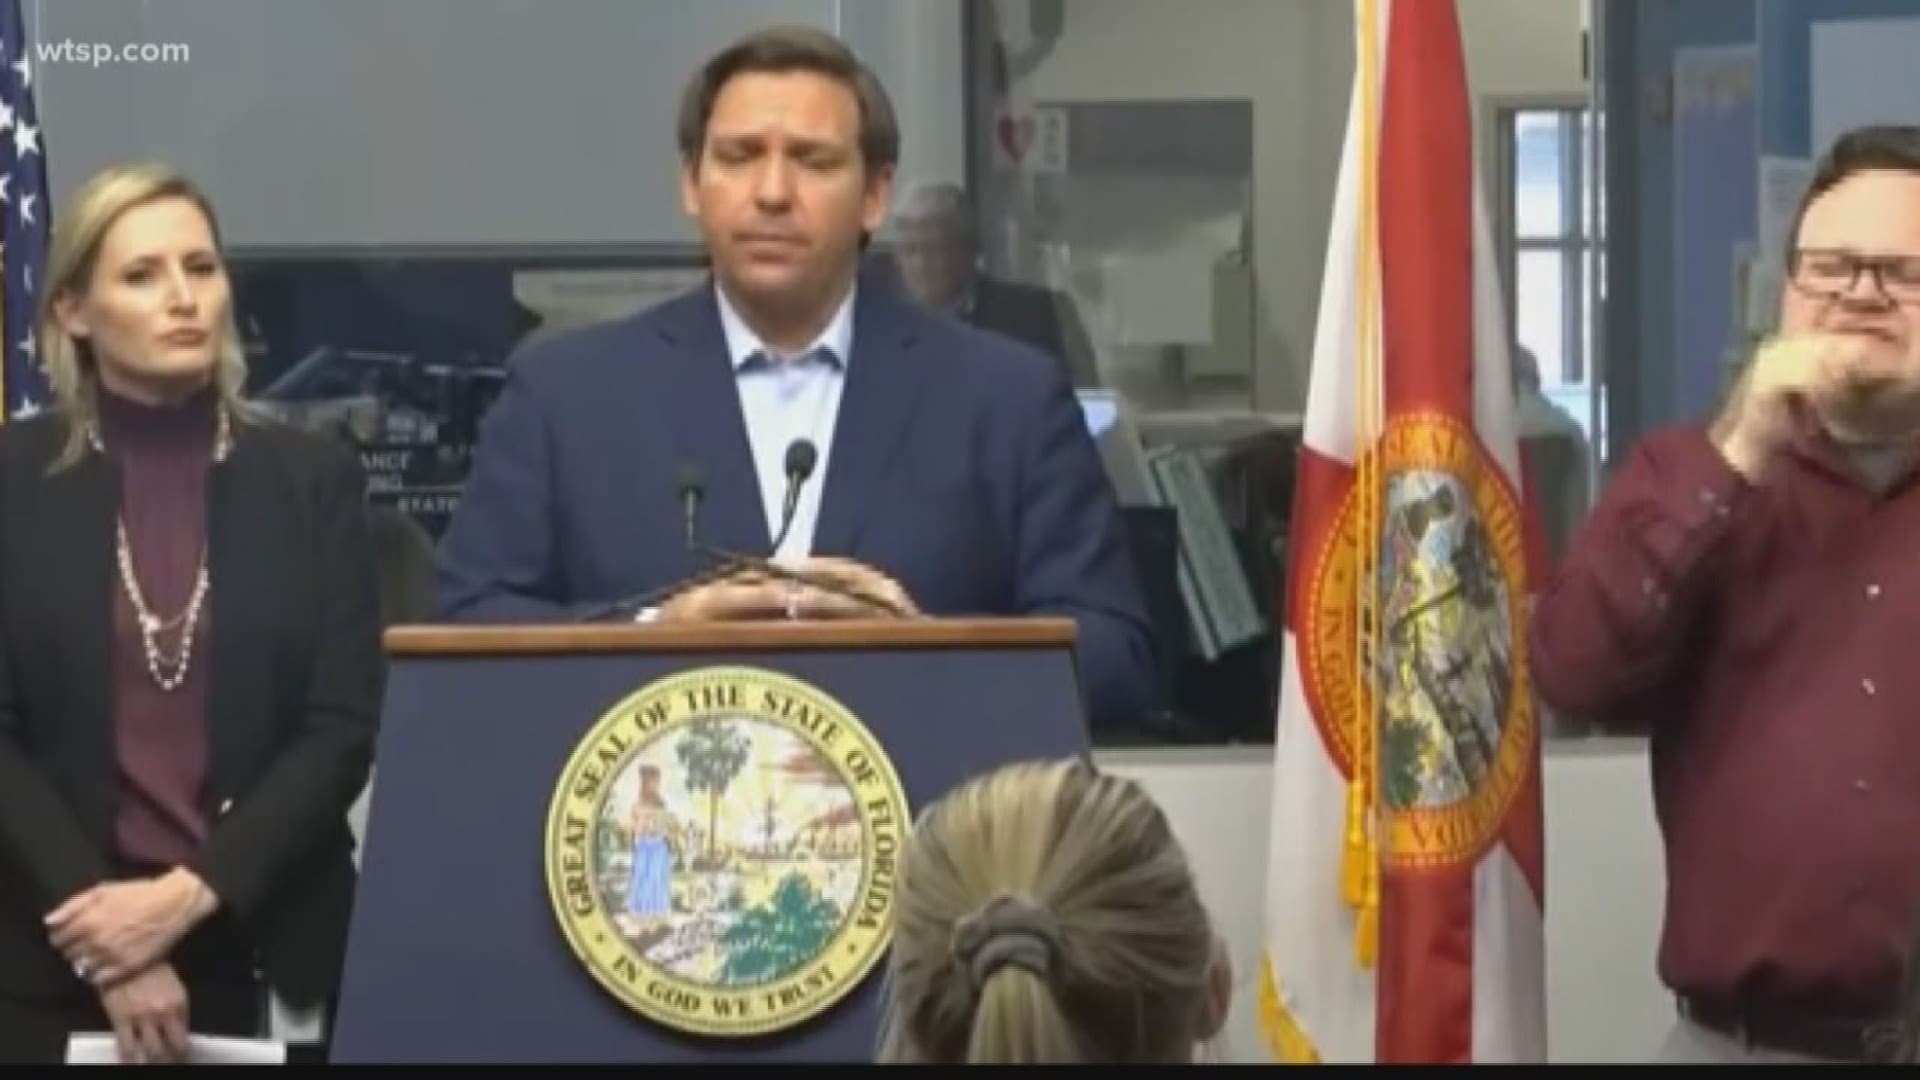 Florida Governor Ron DeSantis is cracking down on who can visit nursing homes in the state as a way to help combat the spread of COVID-19, the coronavirus.